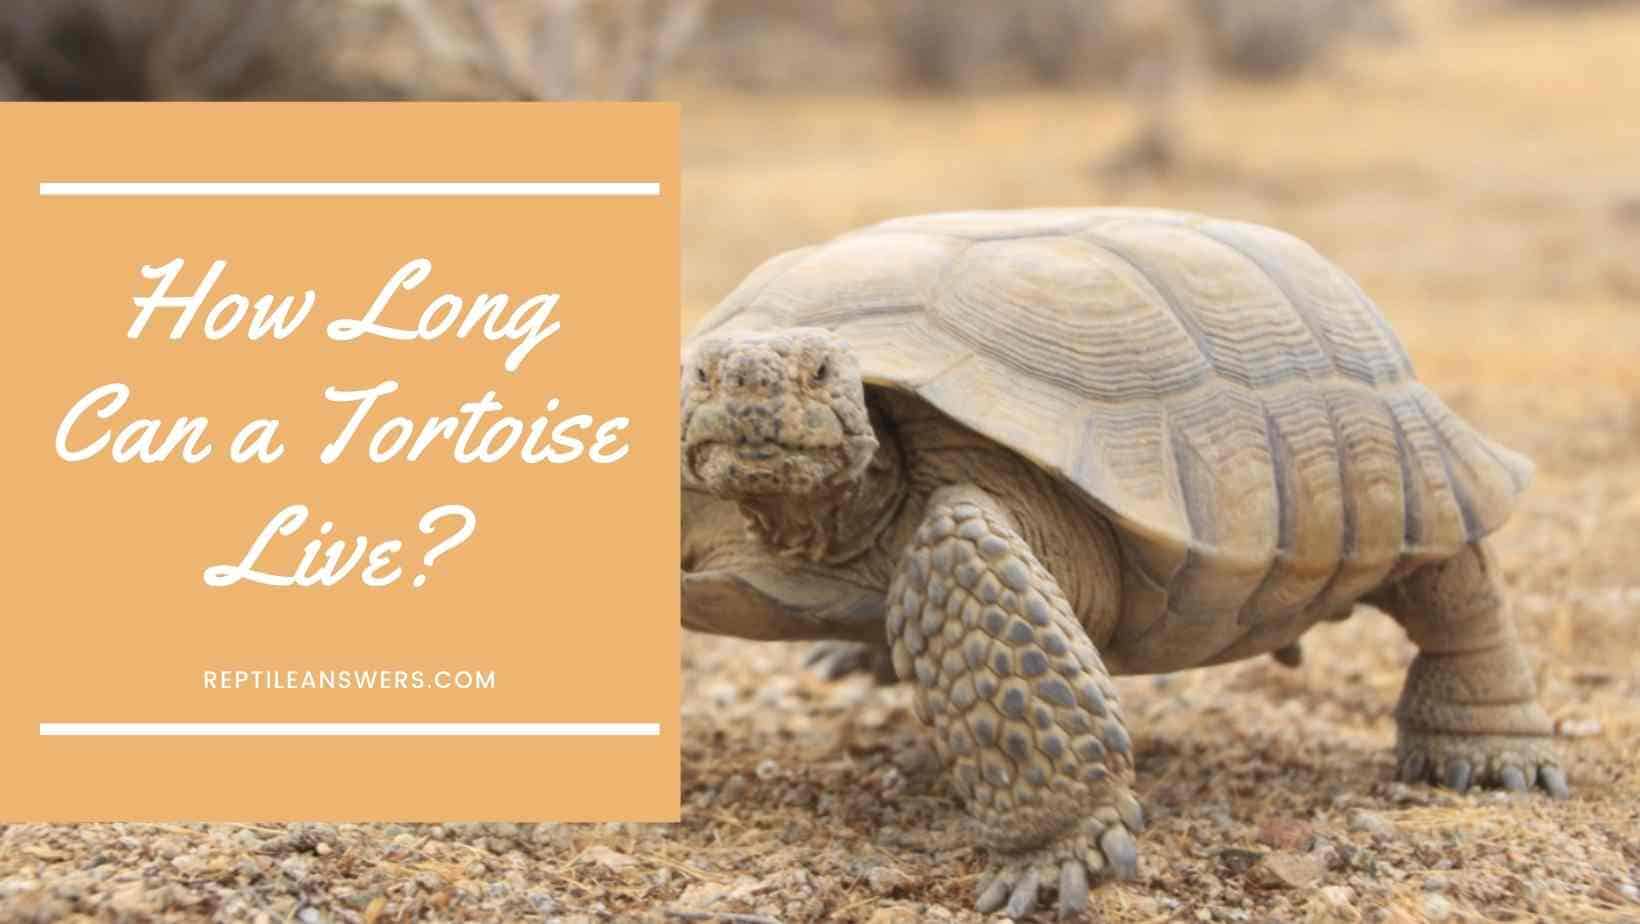 How Long does a Tortoise Live